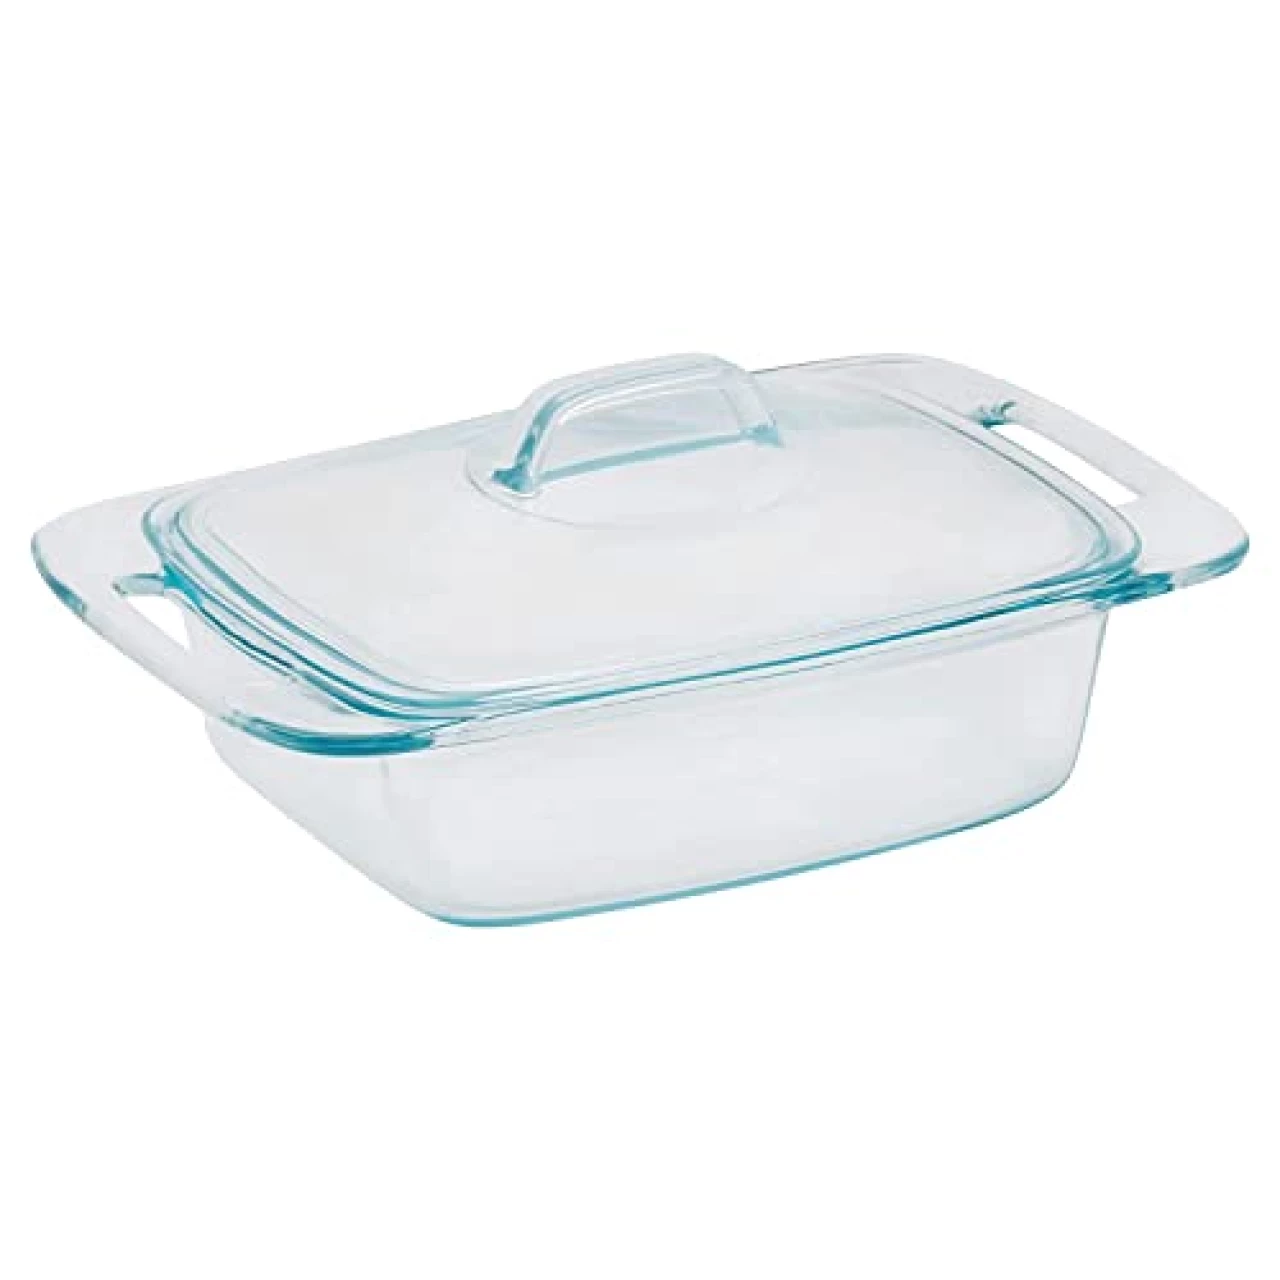 Pyrex Easy Grab 2-Qt Glass Casserole Dish with Lid, Tempered Glass Baking Dish with Large Handles